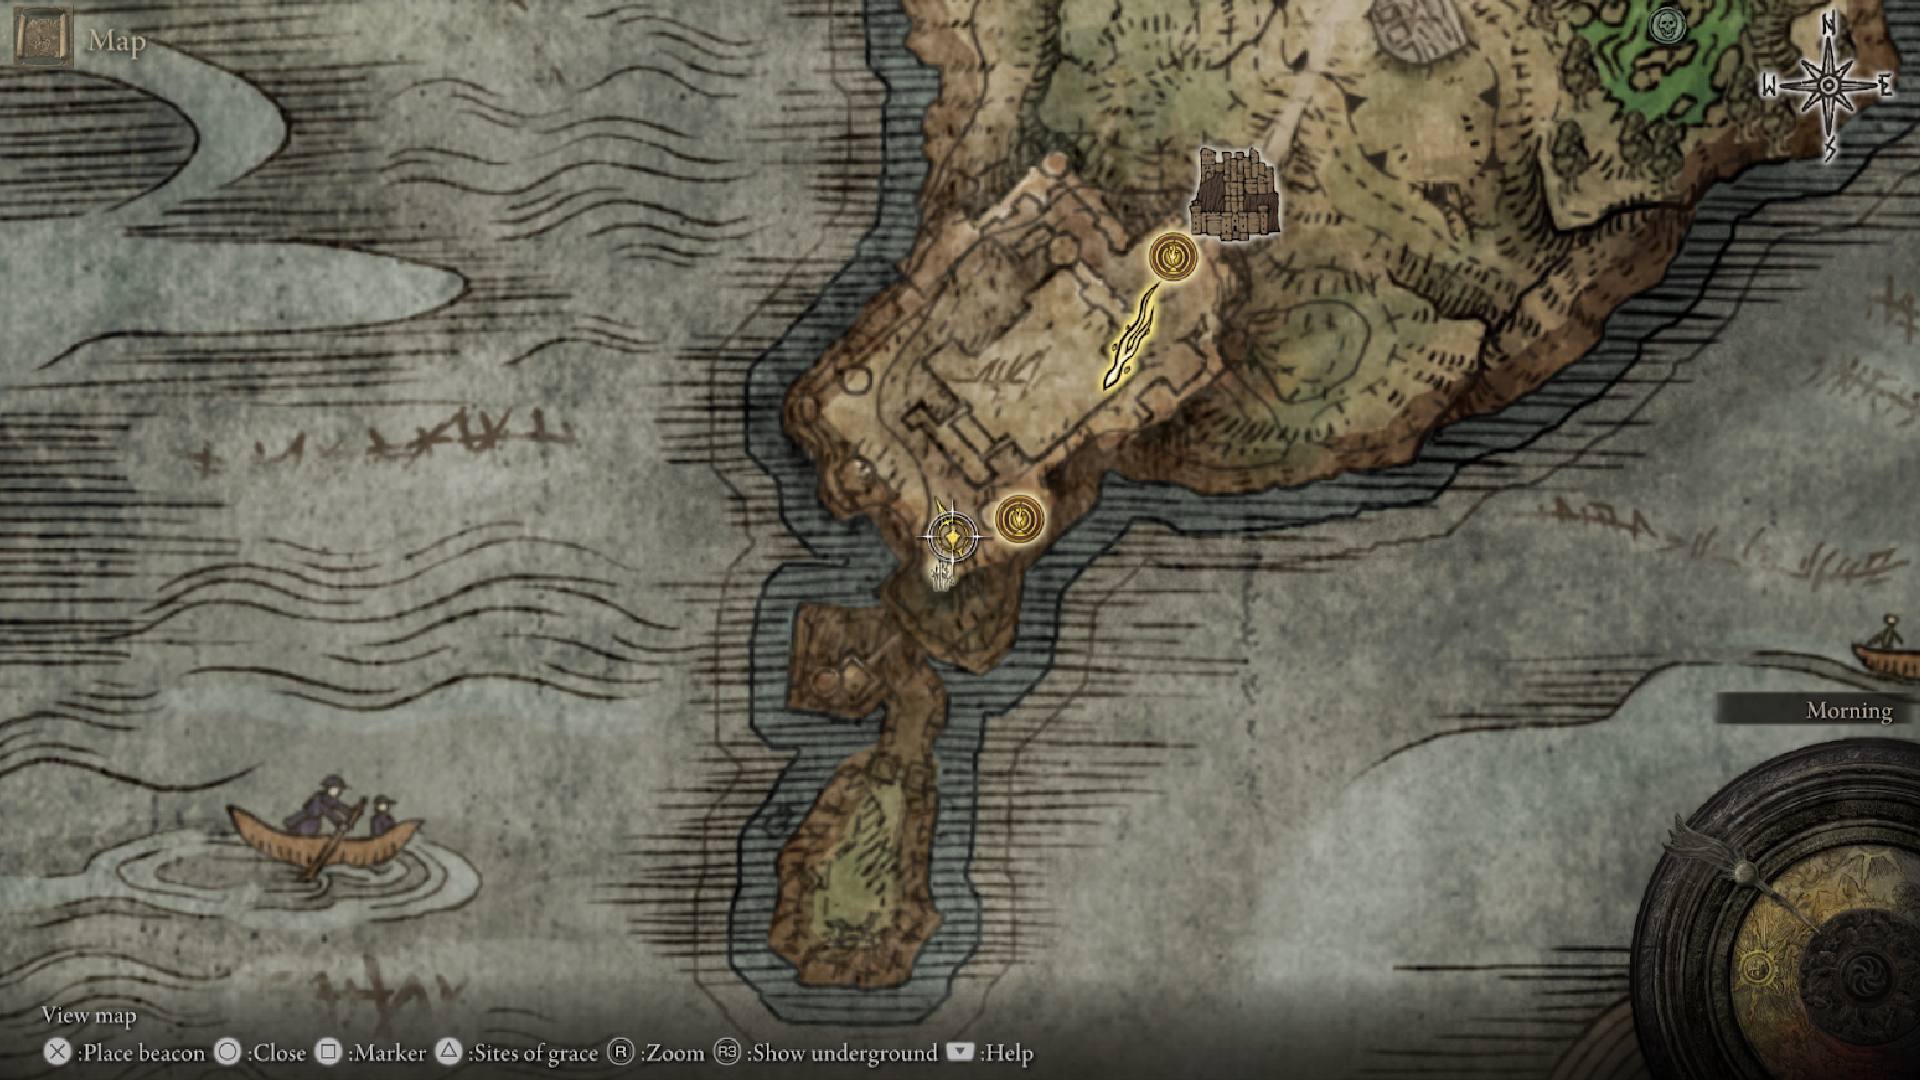 Elden Ring Stonesword Key locations: The map shows the location of the key